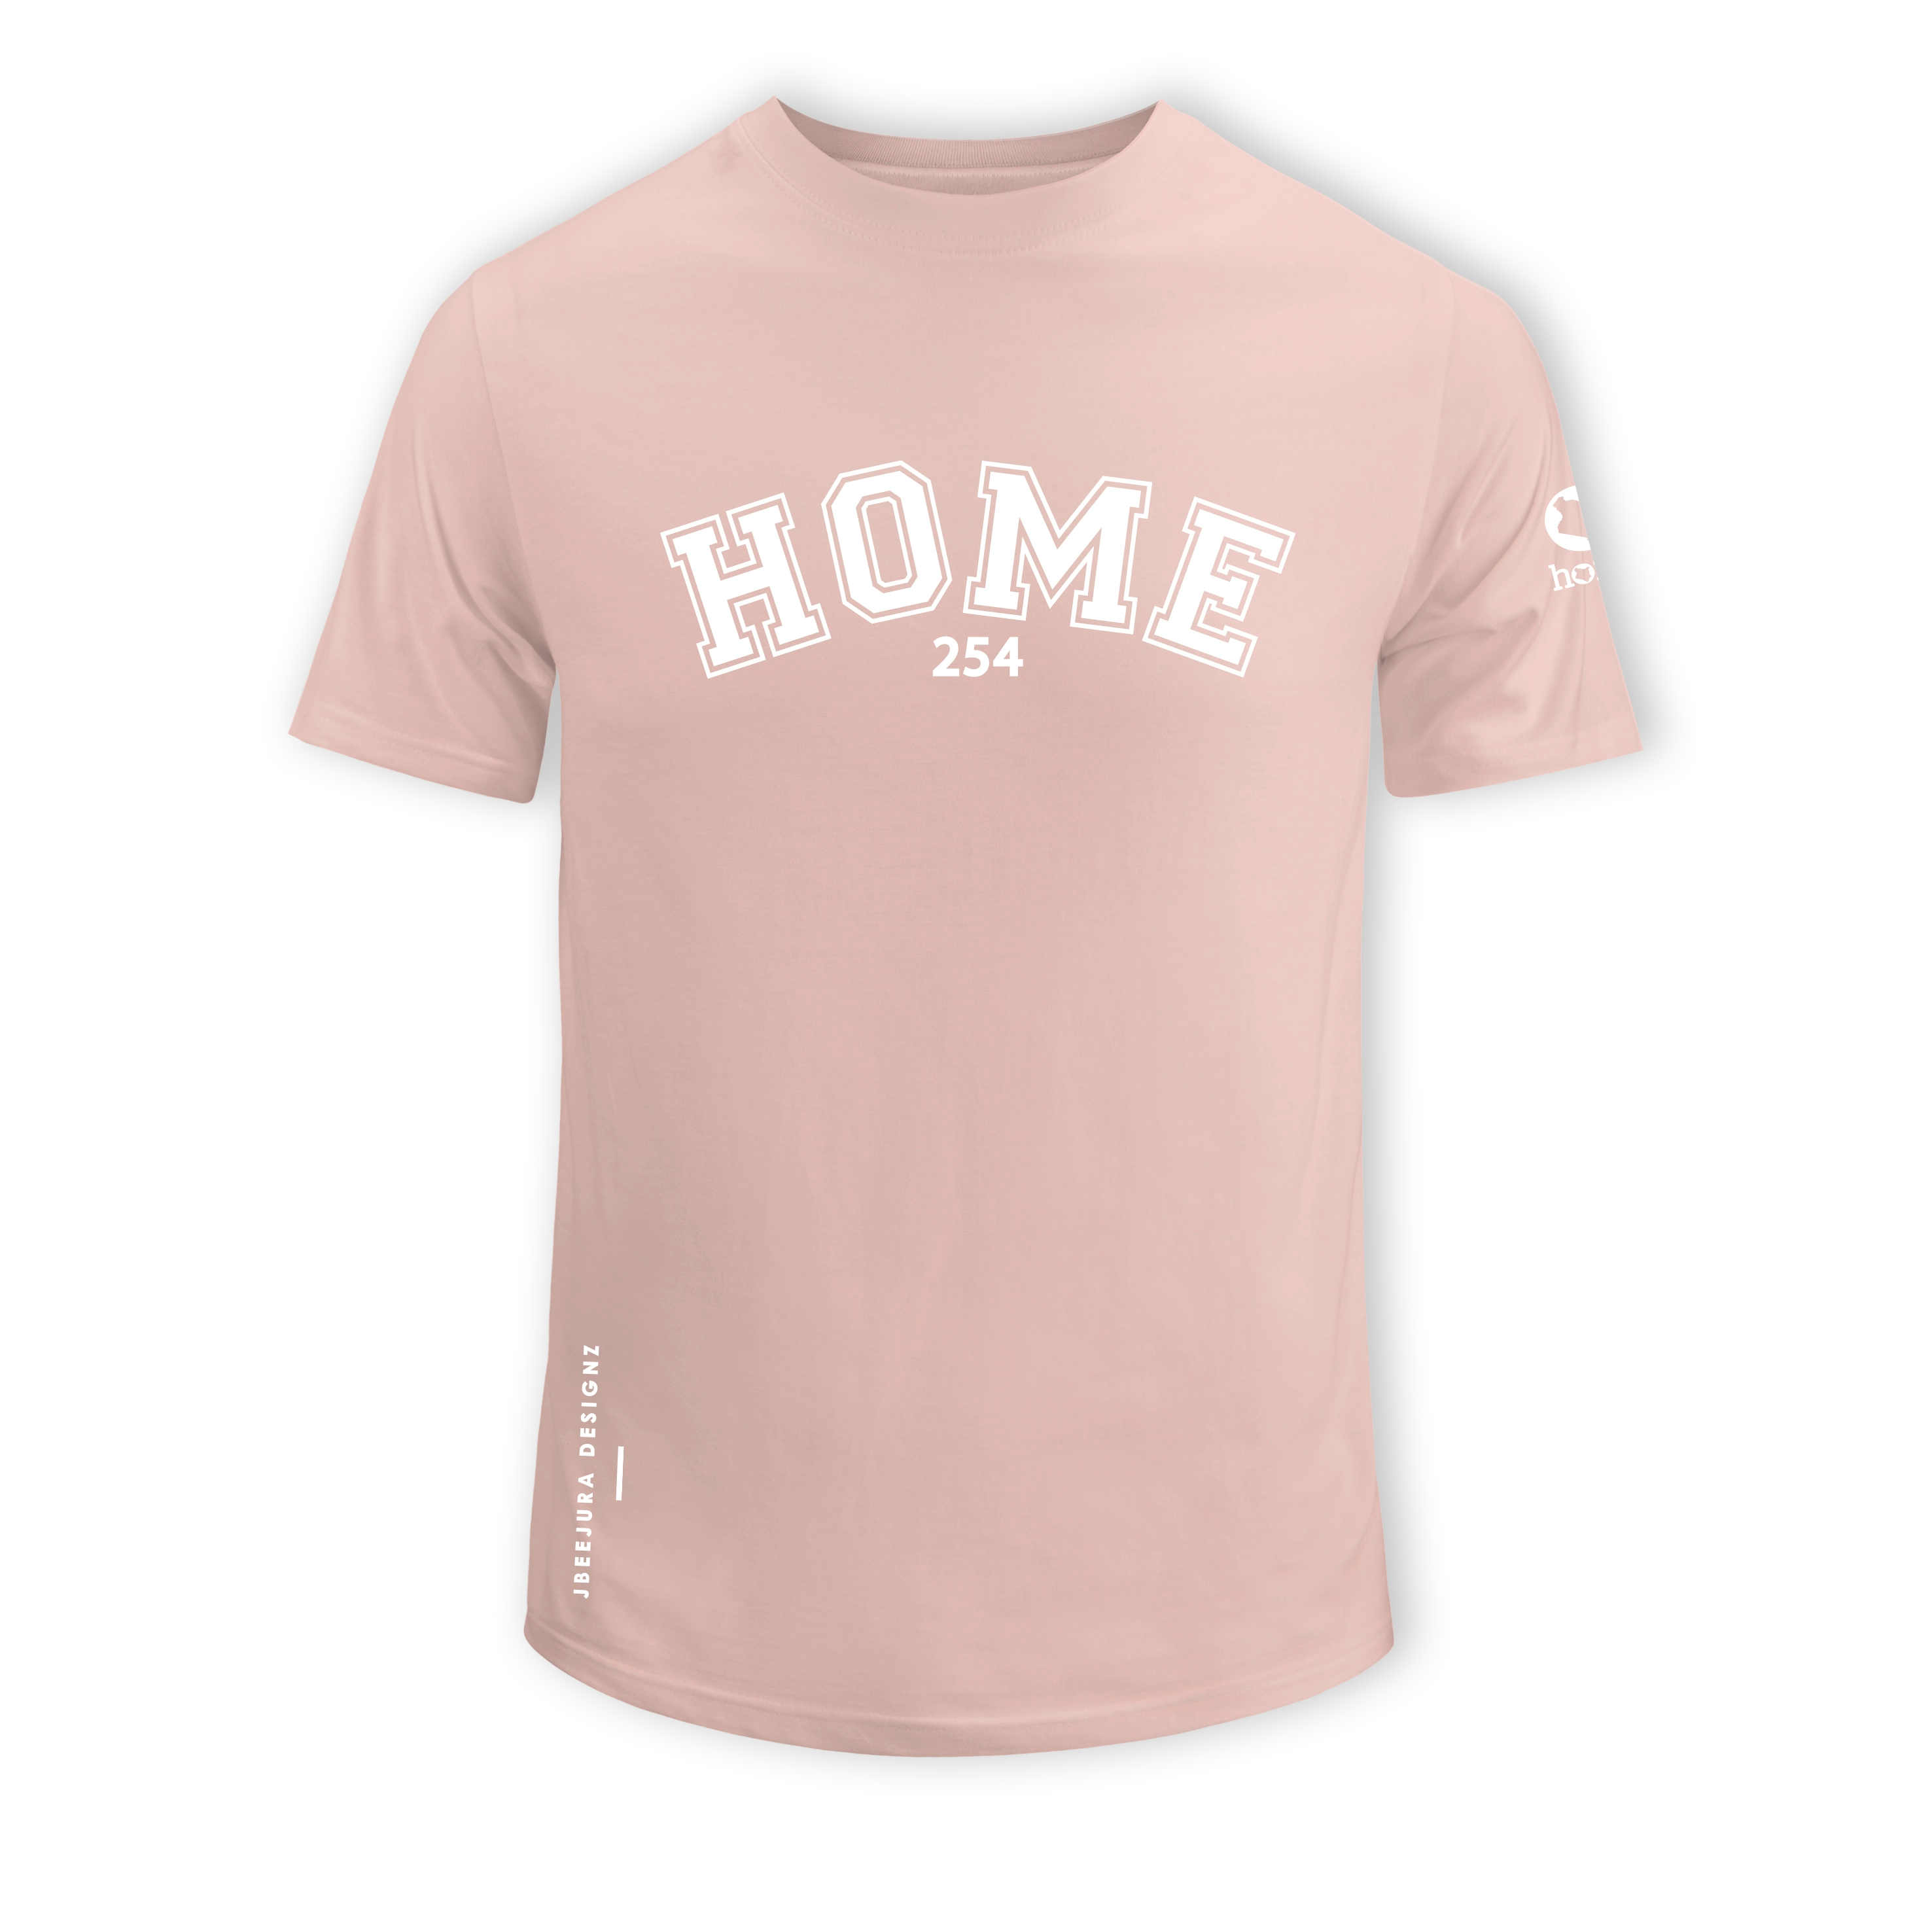 home_254 SHORT-SLEEVED PEACH T-SHIRT WITH A WHITE COLLEGE PRINT – COTTON PLUS FABRIC